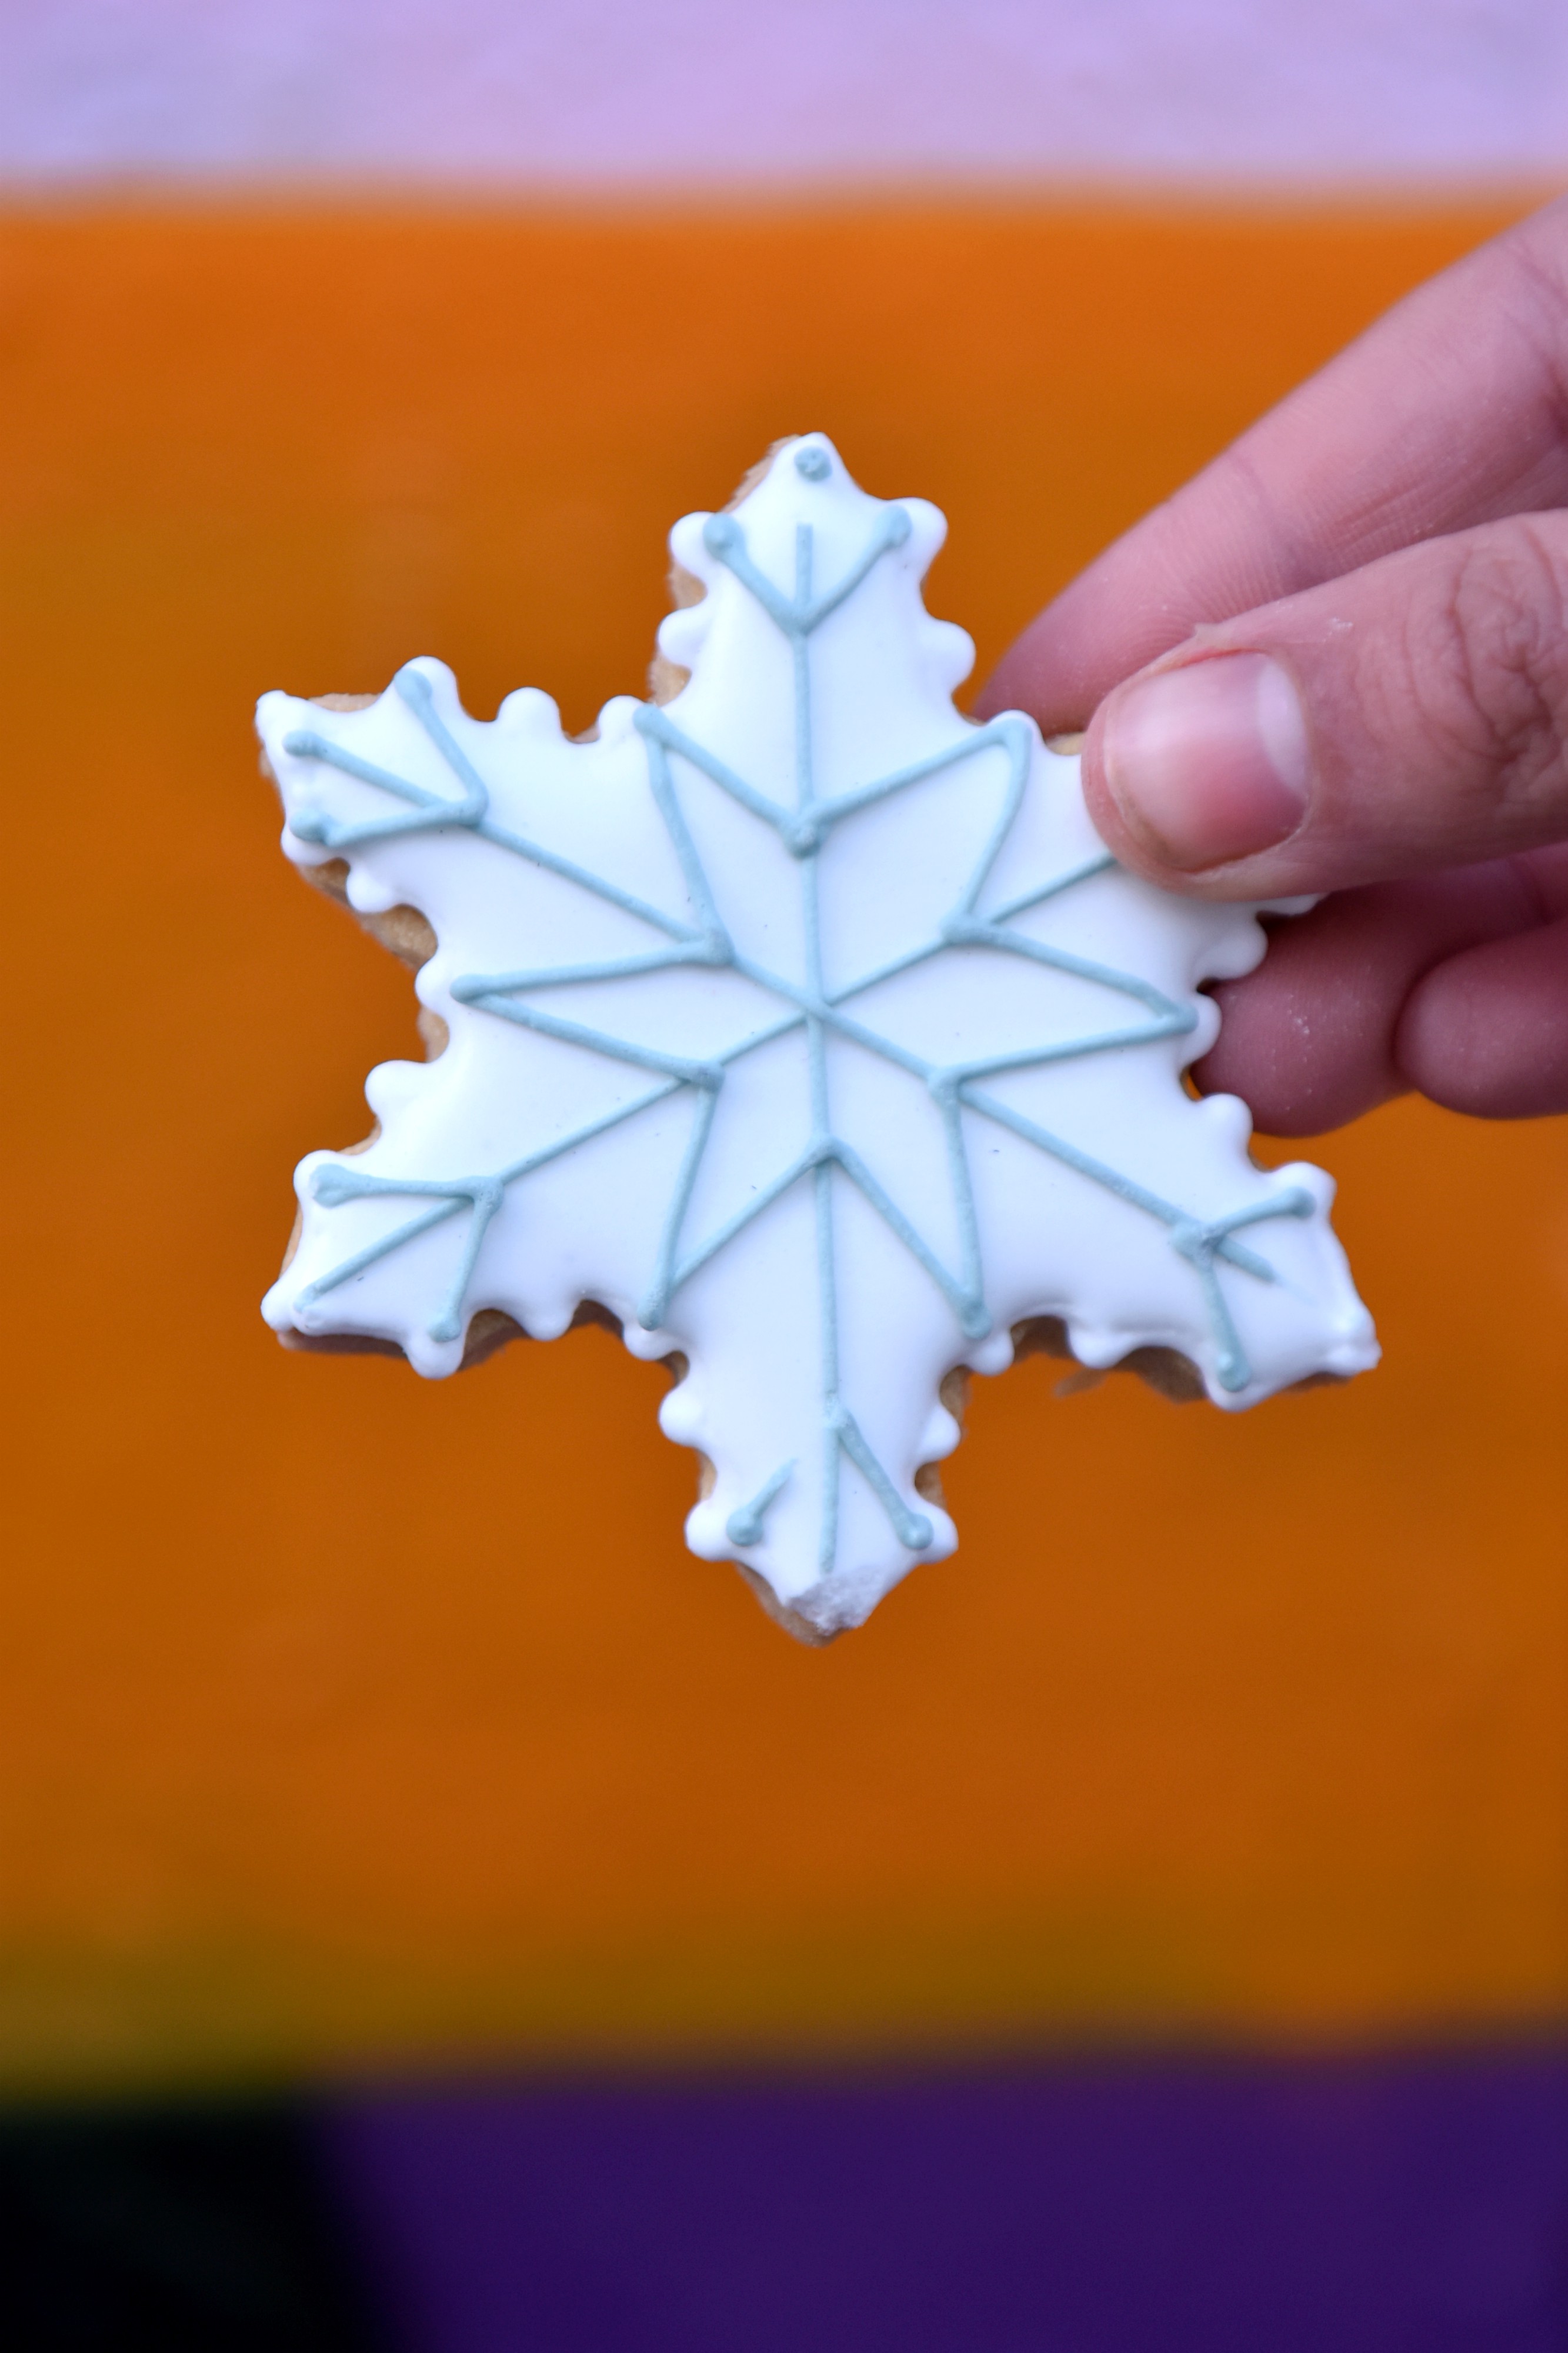 <img src="ana.jpg" alt="ana snowflake biscuit christmas gift guide for her"/> 